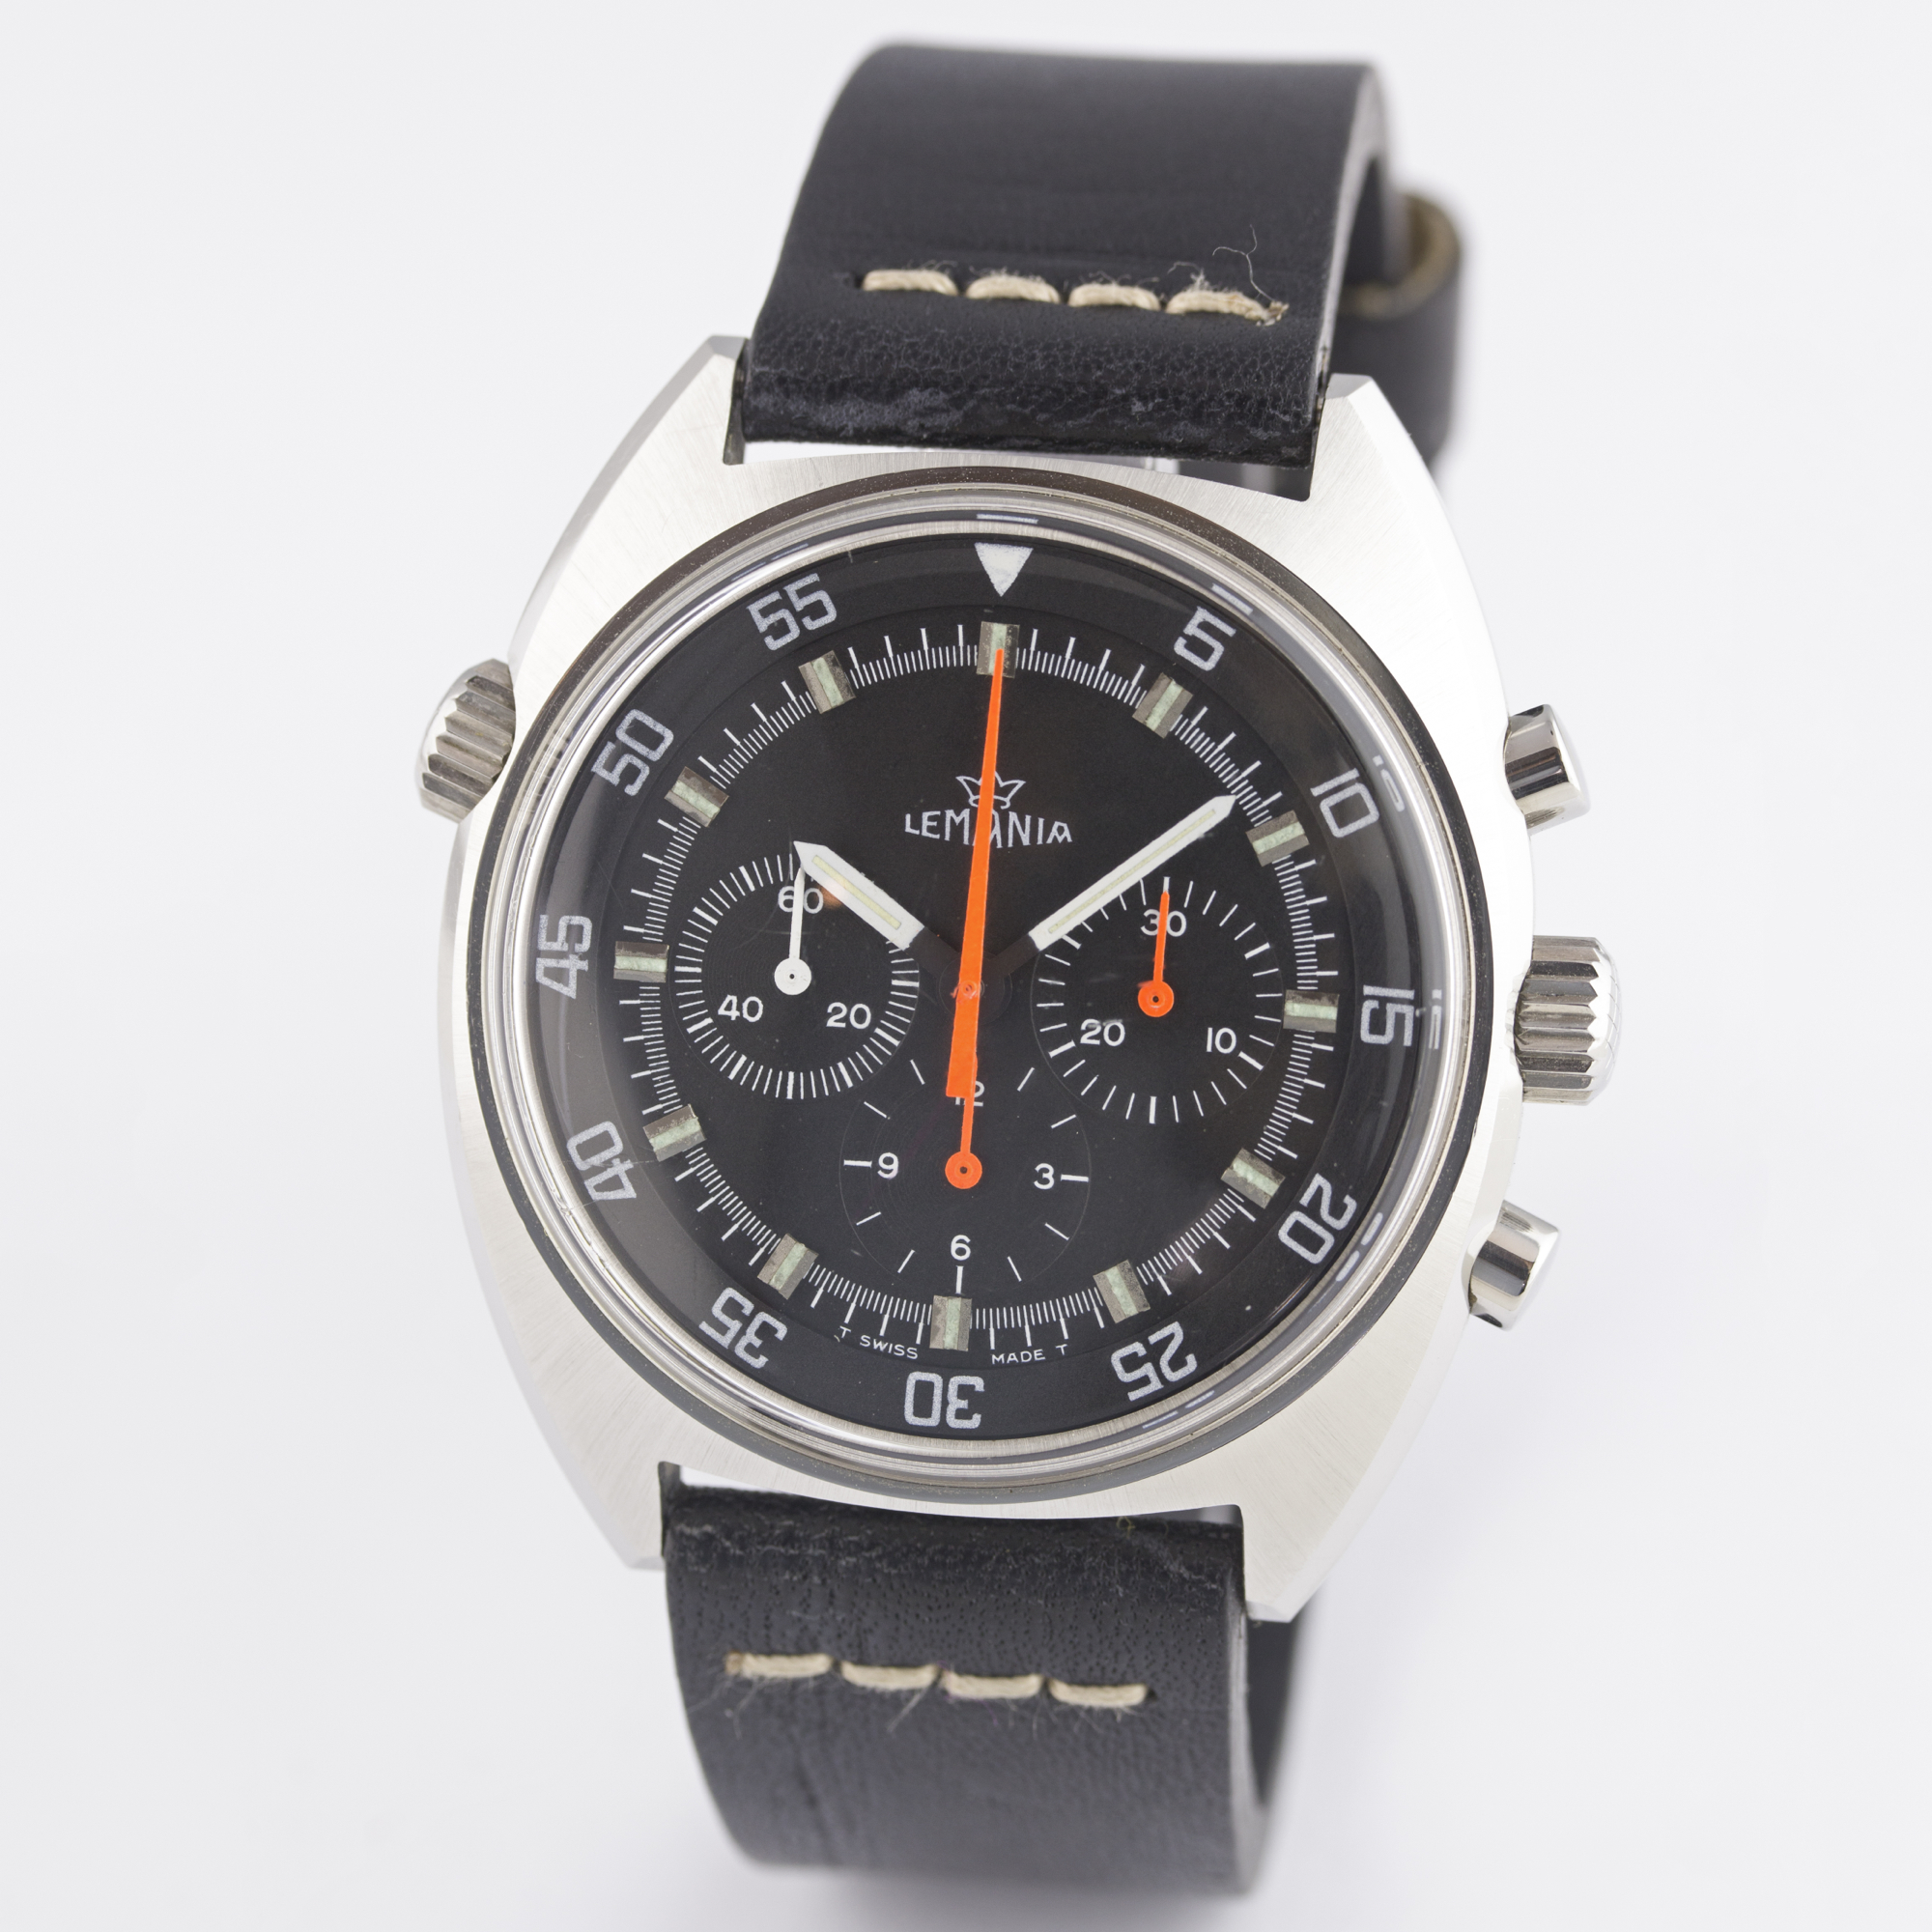 A RARE GENTLEMAN'S STAINLESS STEEL LEMANIA DIVERS CHRONOGRAPH WRIST WATCH CIRCA 1970s, REF. 9658 - Image 3 of 9